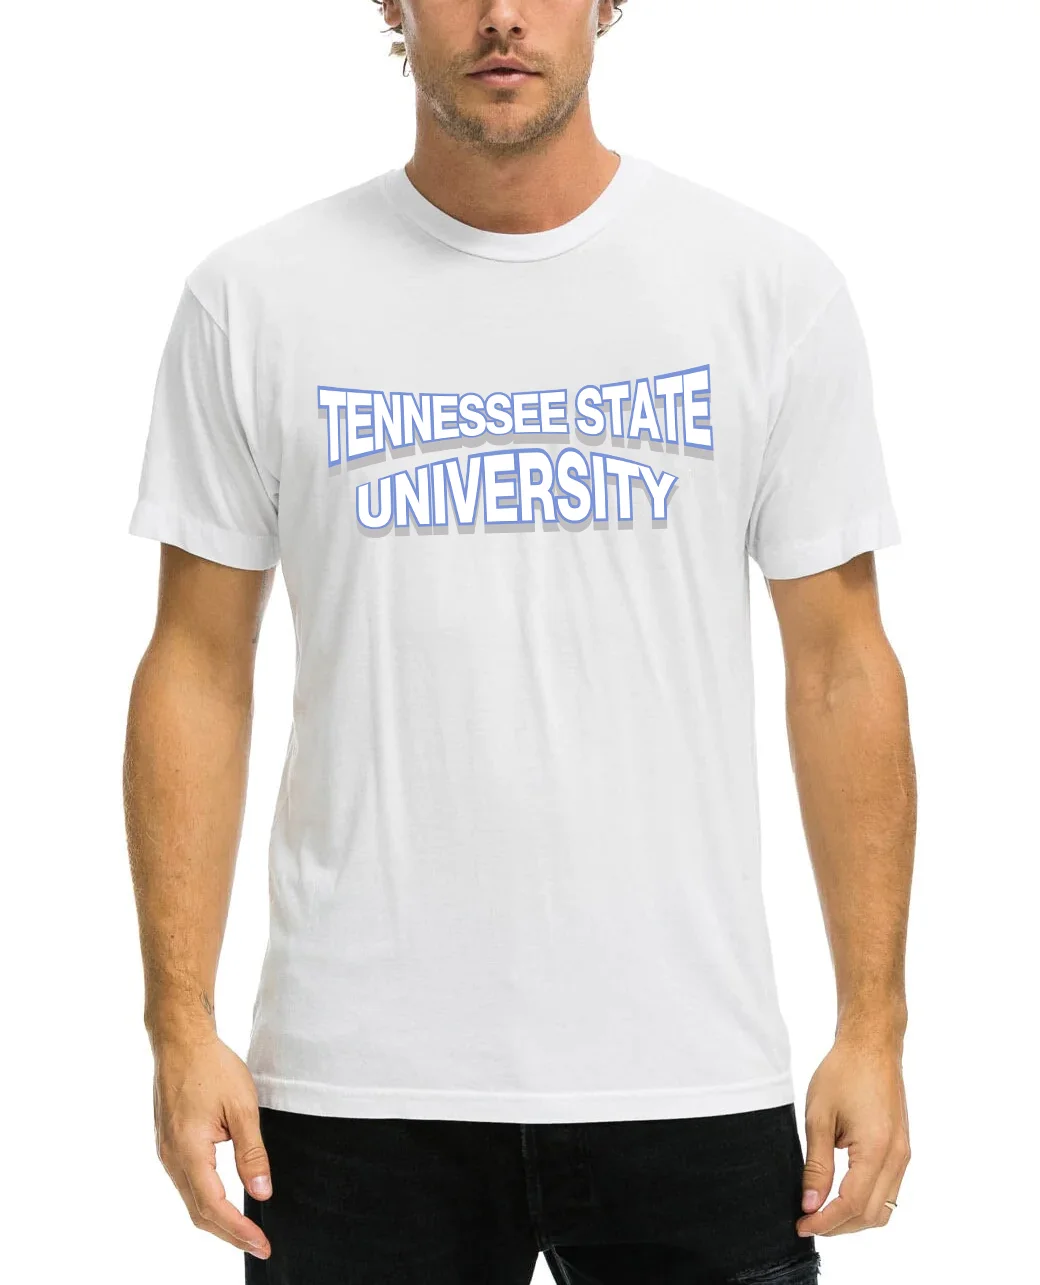 TENNESSEE STATE UNIVERSITY T-SHIRT